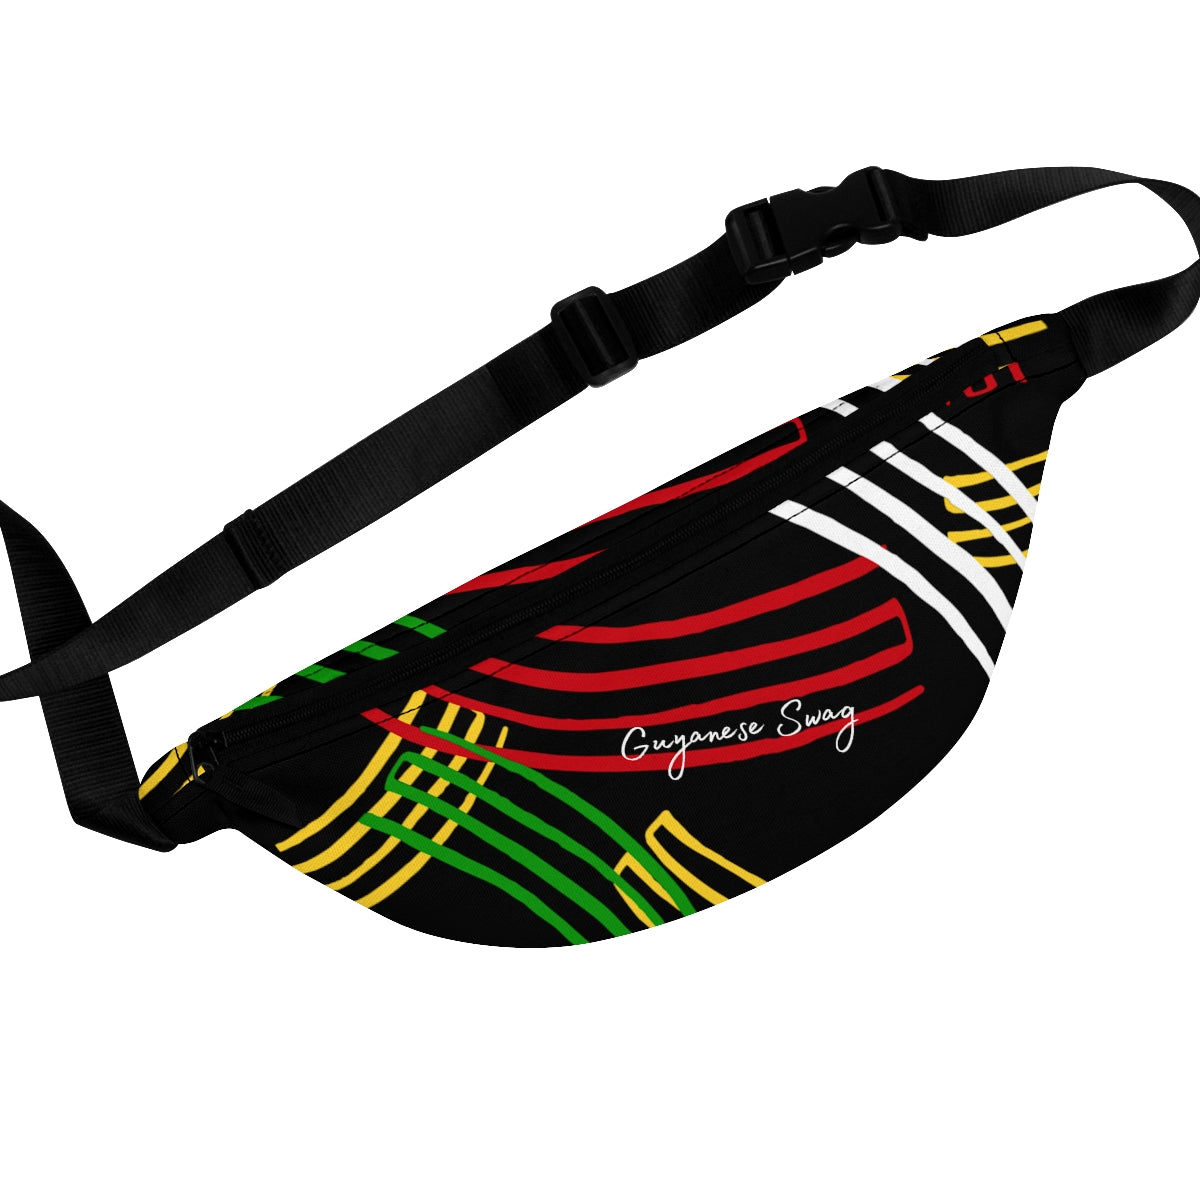 Guyanese Swag Ice Gold Green Stripe Fanny Pack.